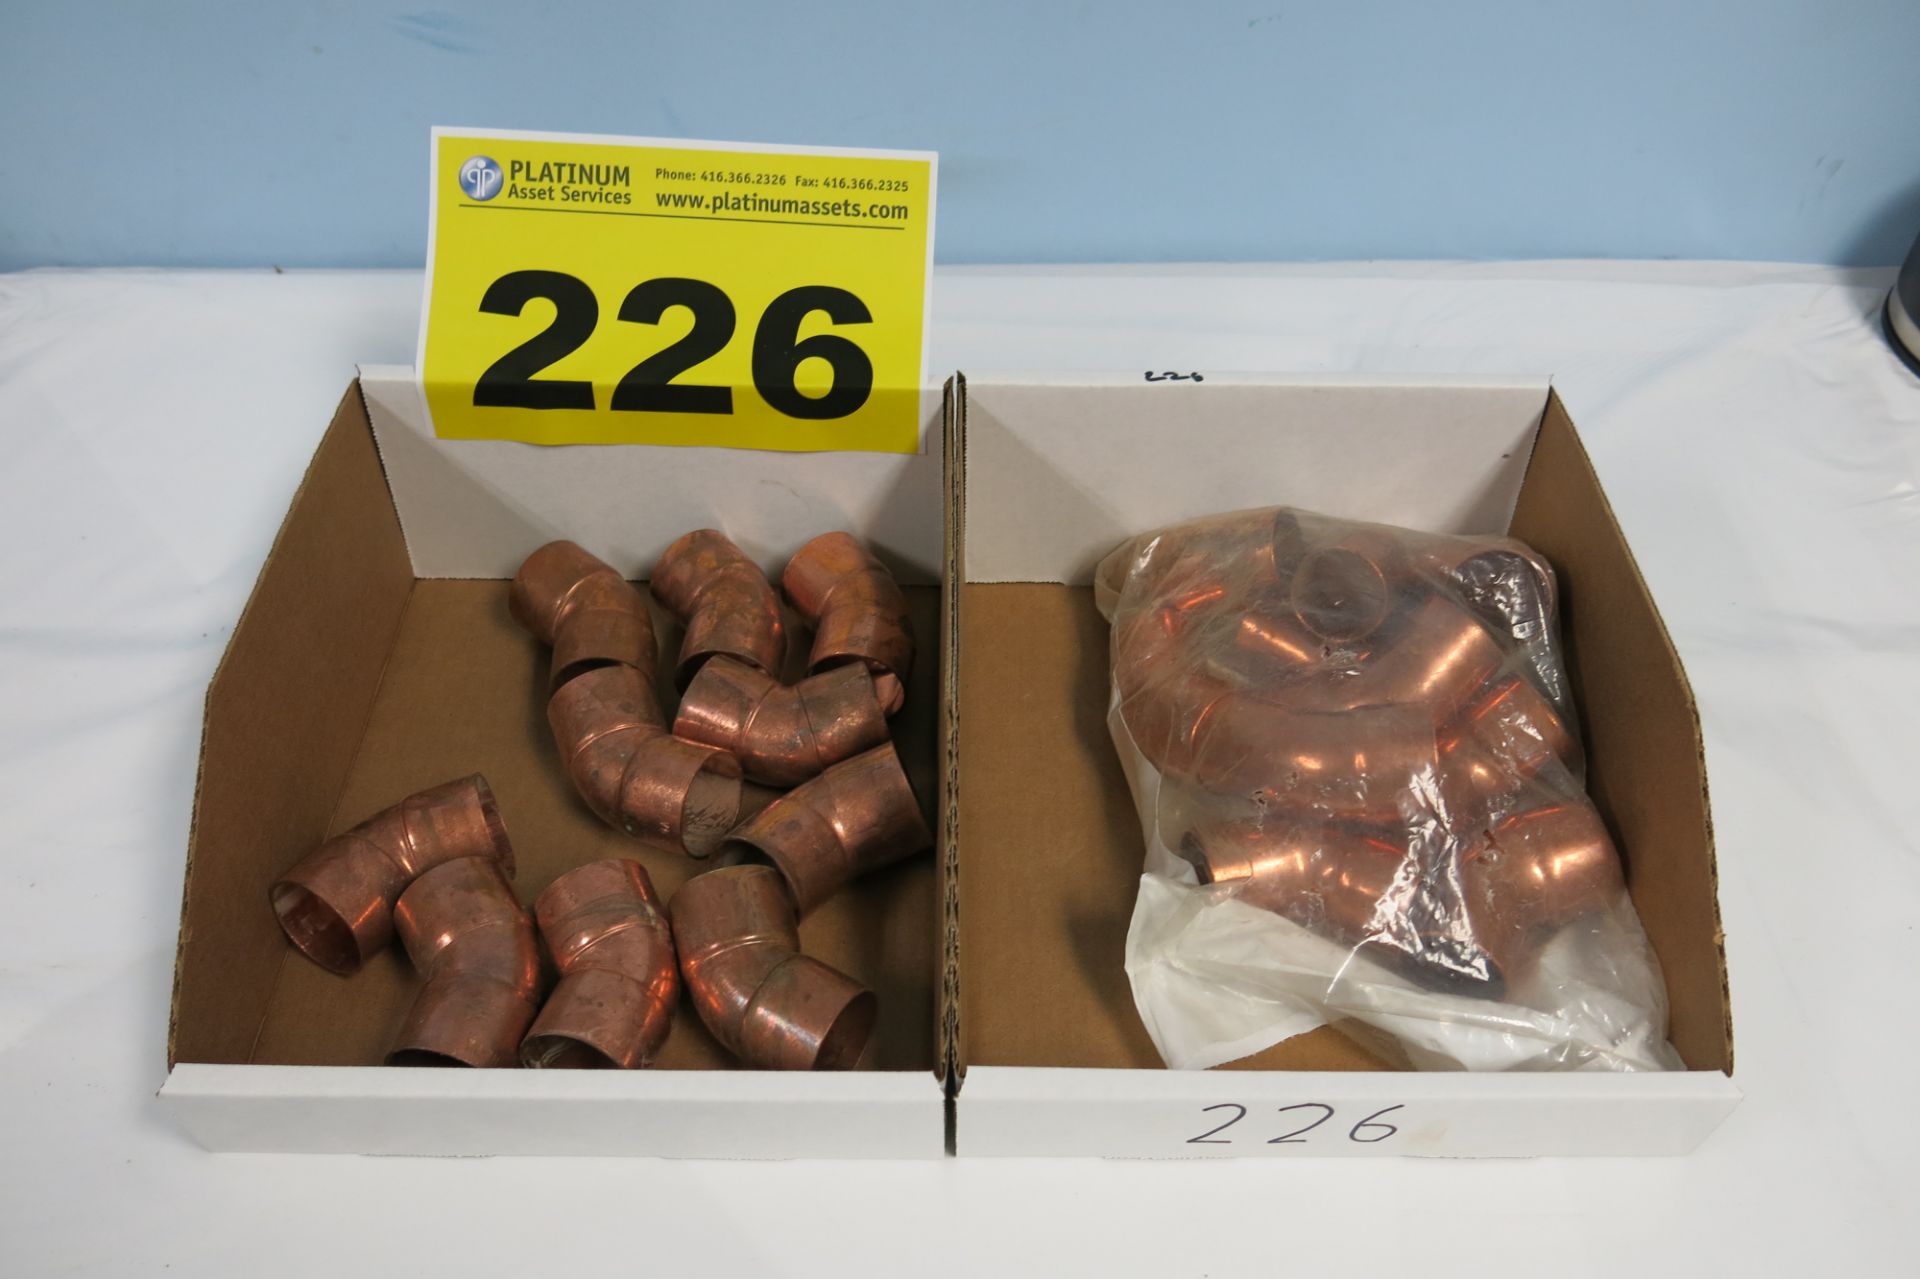 LOT OF CELLO PRODUCTS, WP6-2-24, 1-1/2" FTG x 45° COPPER STREET ELBOWS - NEW (LOCATED IN